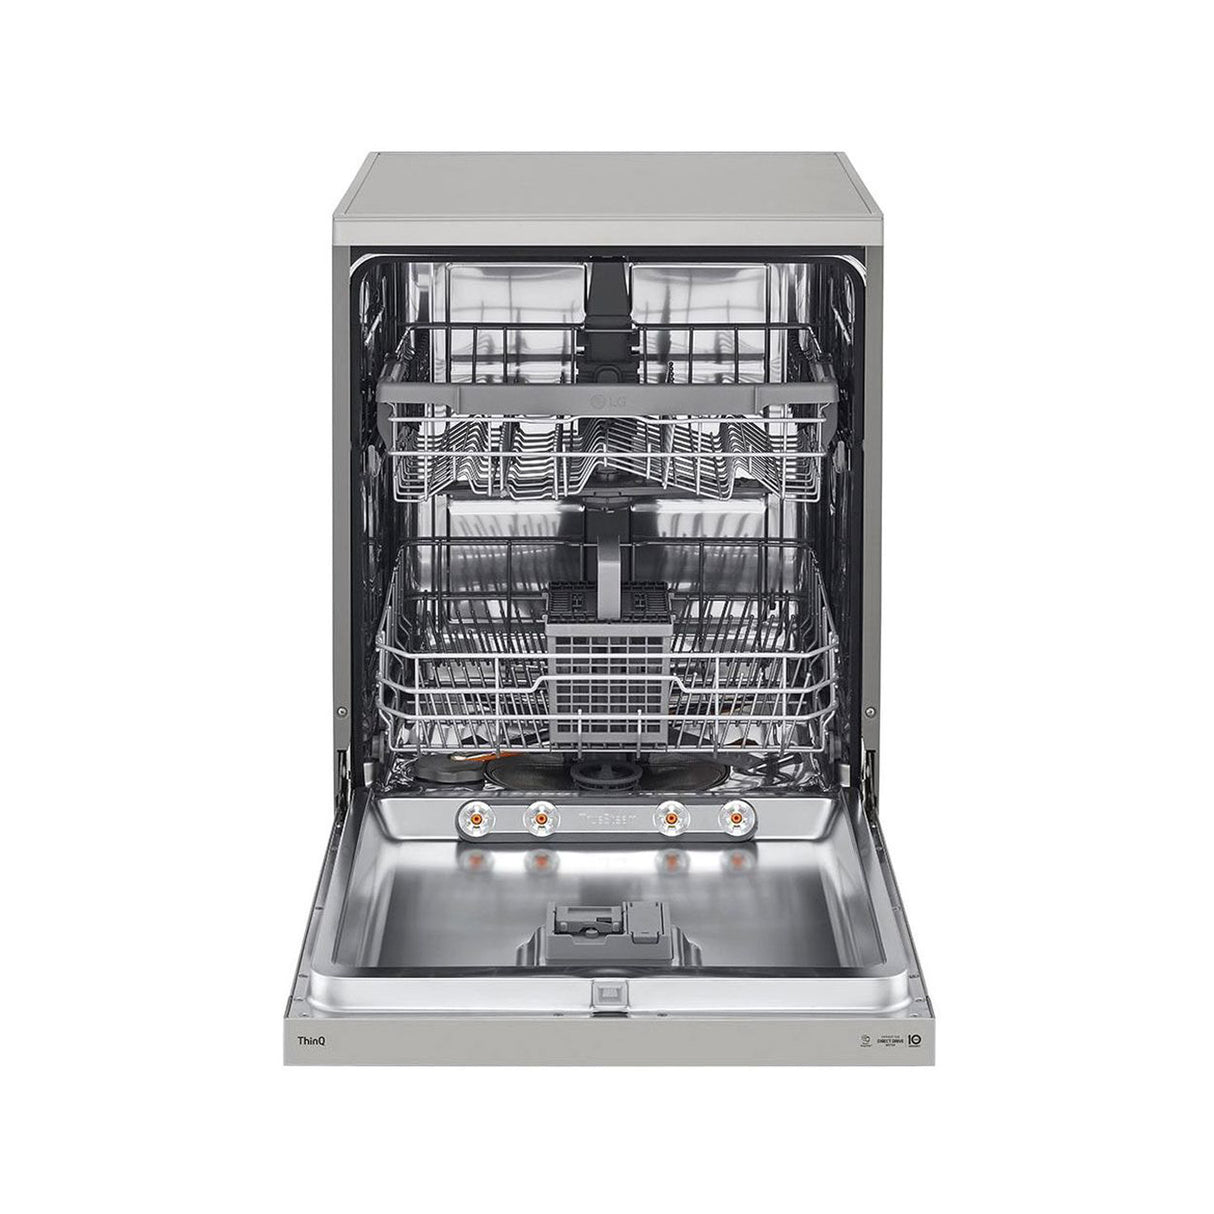 Elevate your kitchen with the LG DFB532FP Dishwasher featuring TrueSteam and QuadWash.